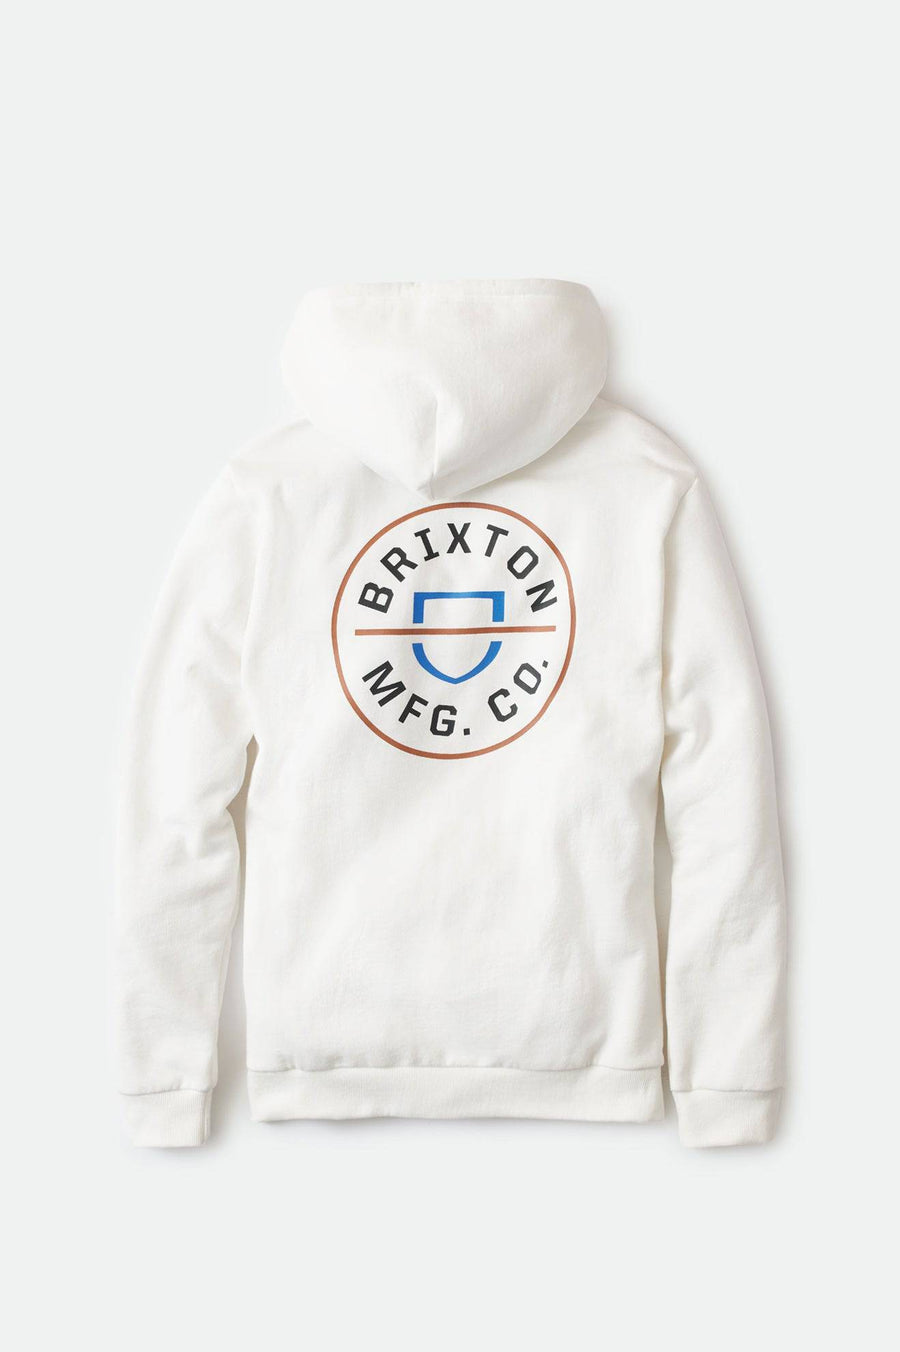 Brixton Crest Hoodie in Off White Carmel and Black